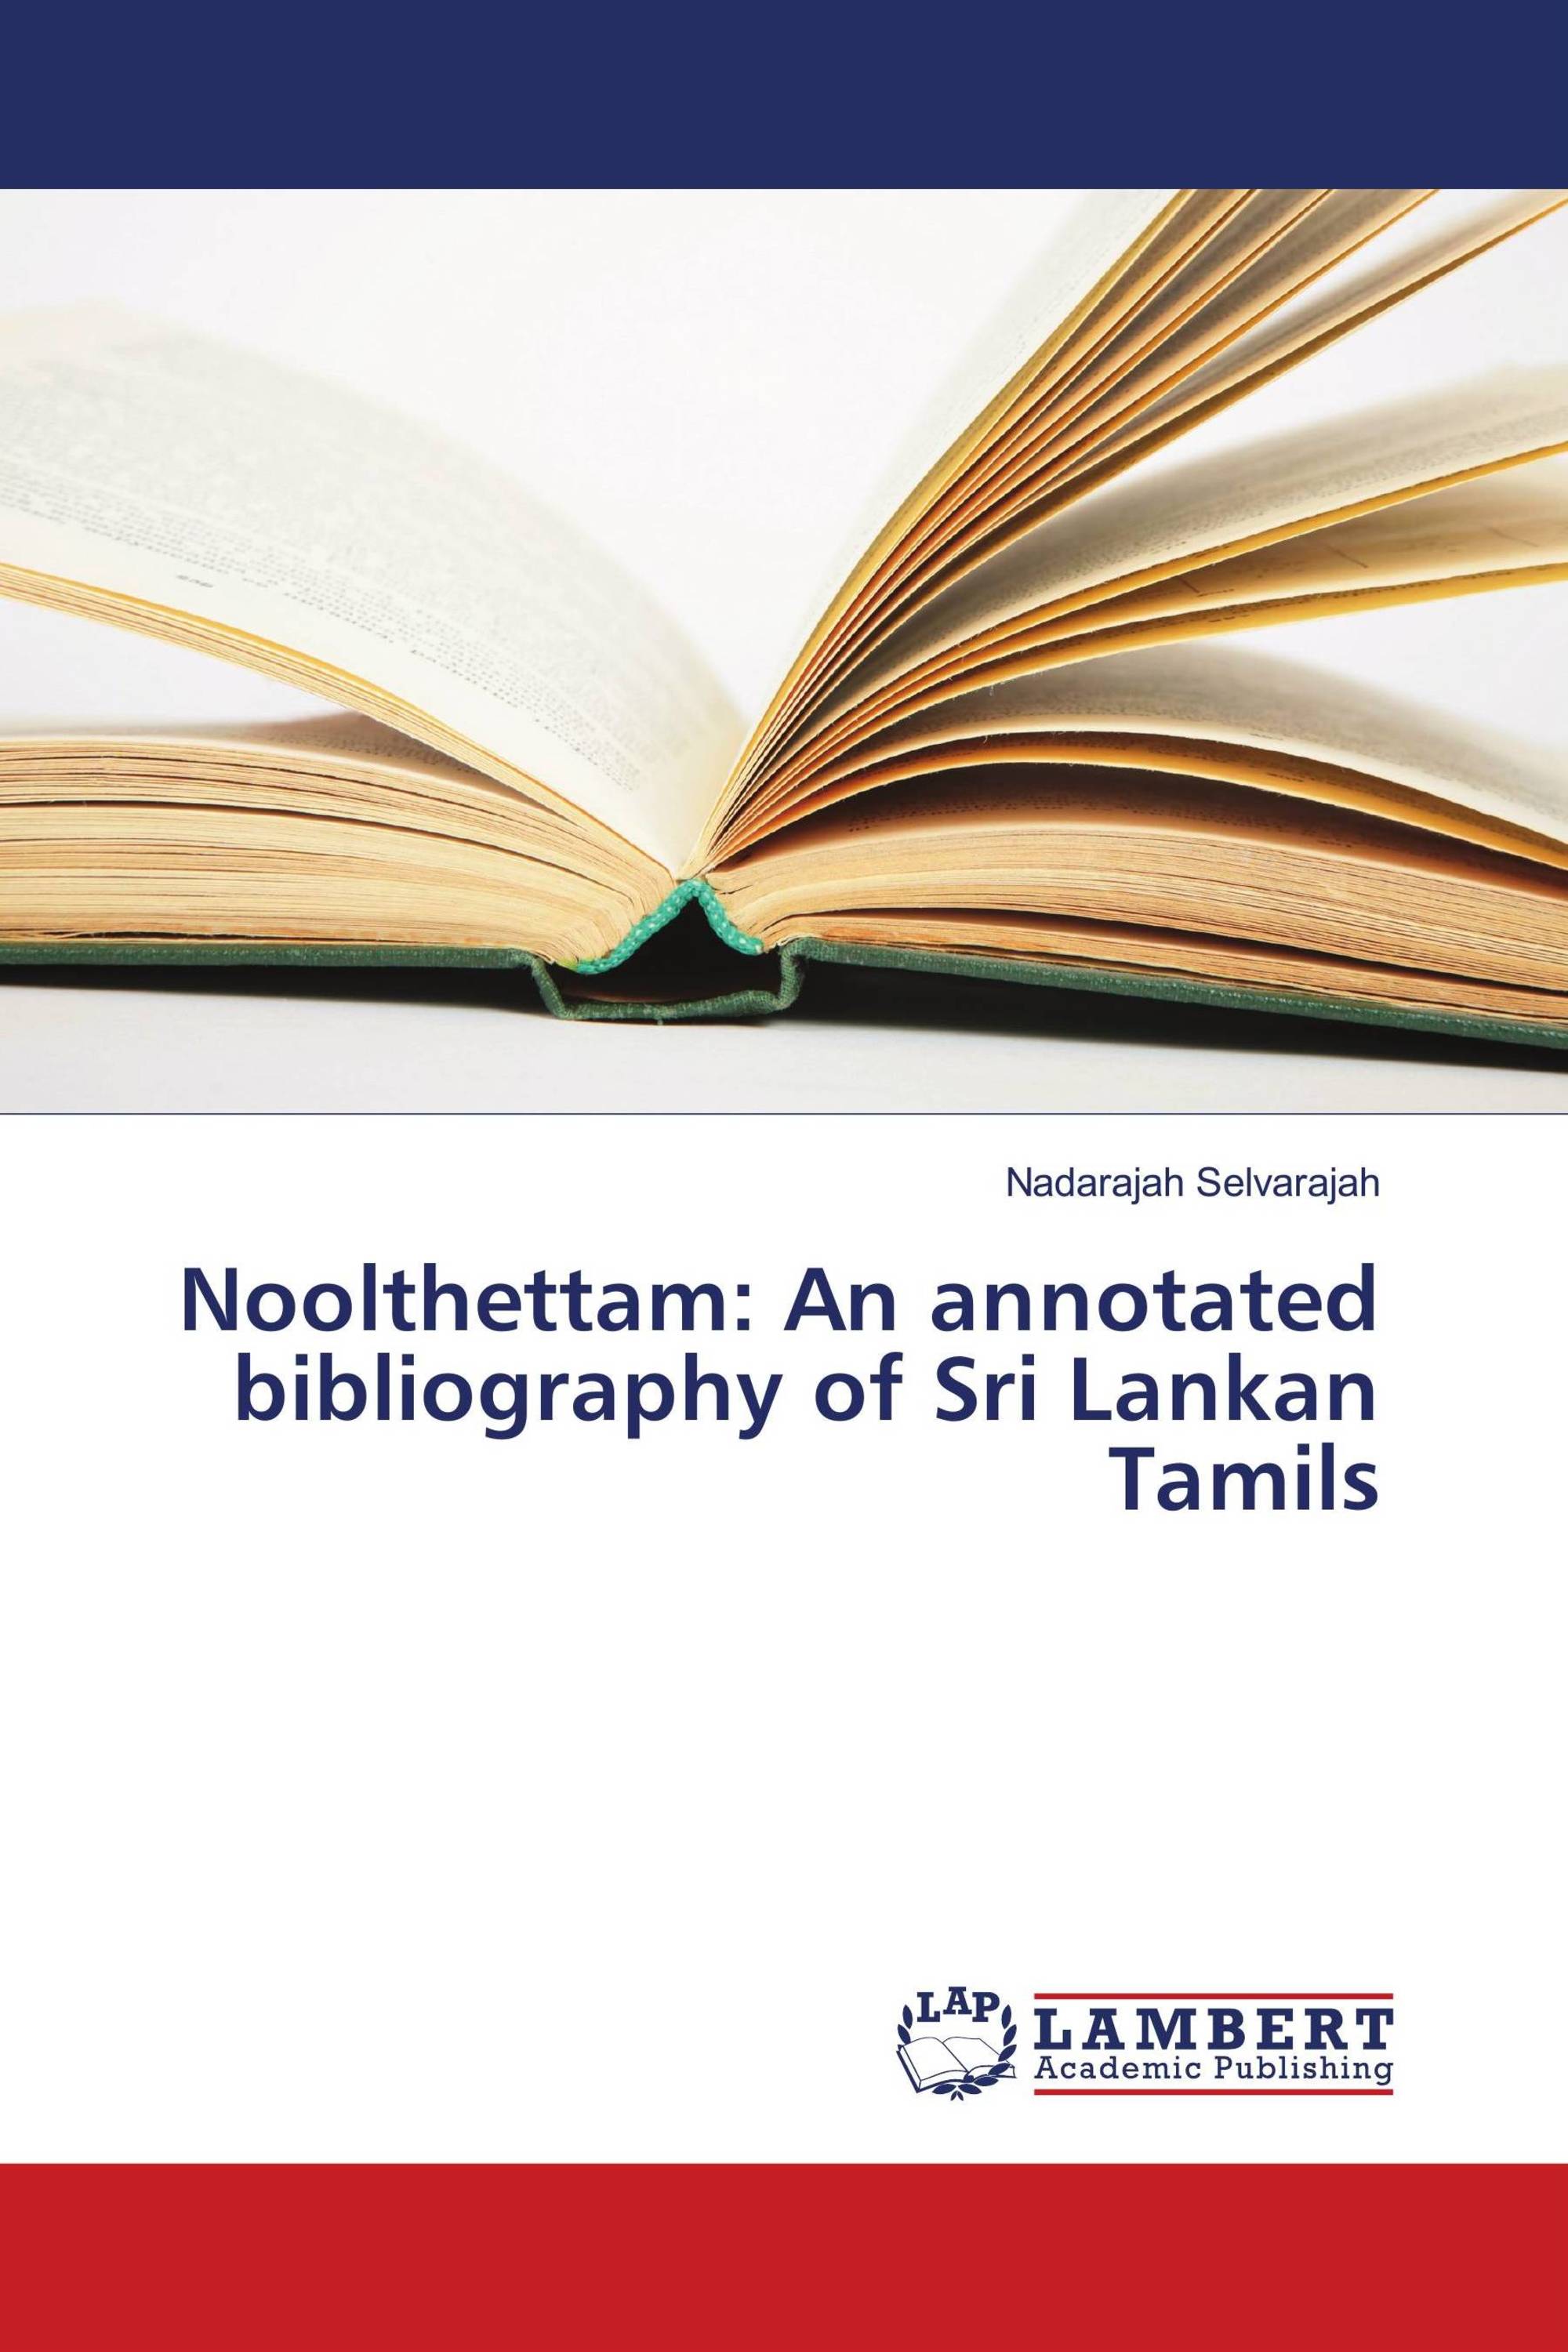 Noolthettam: An annotated bibliography of Sri Lankan Tamils